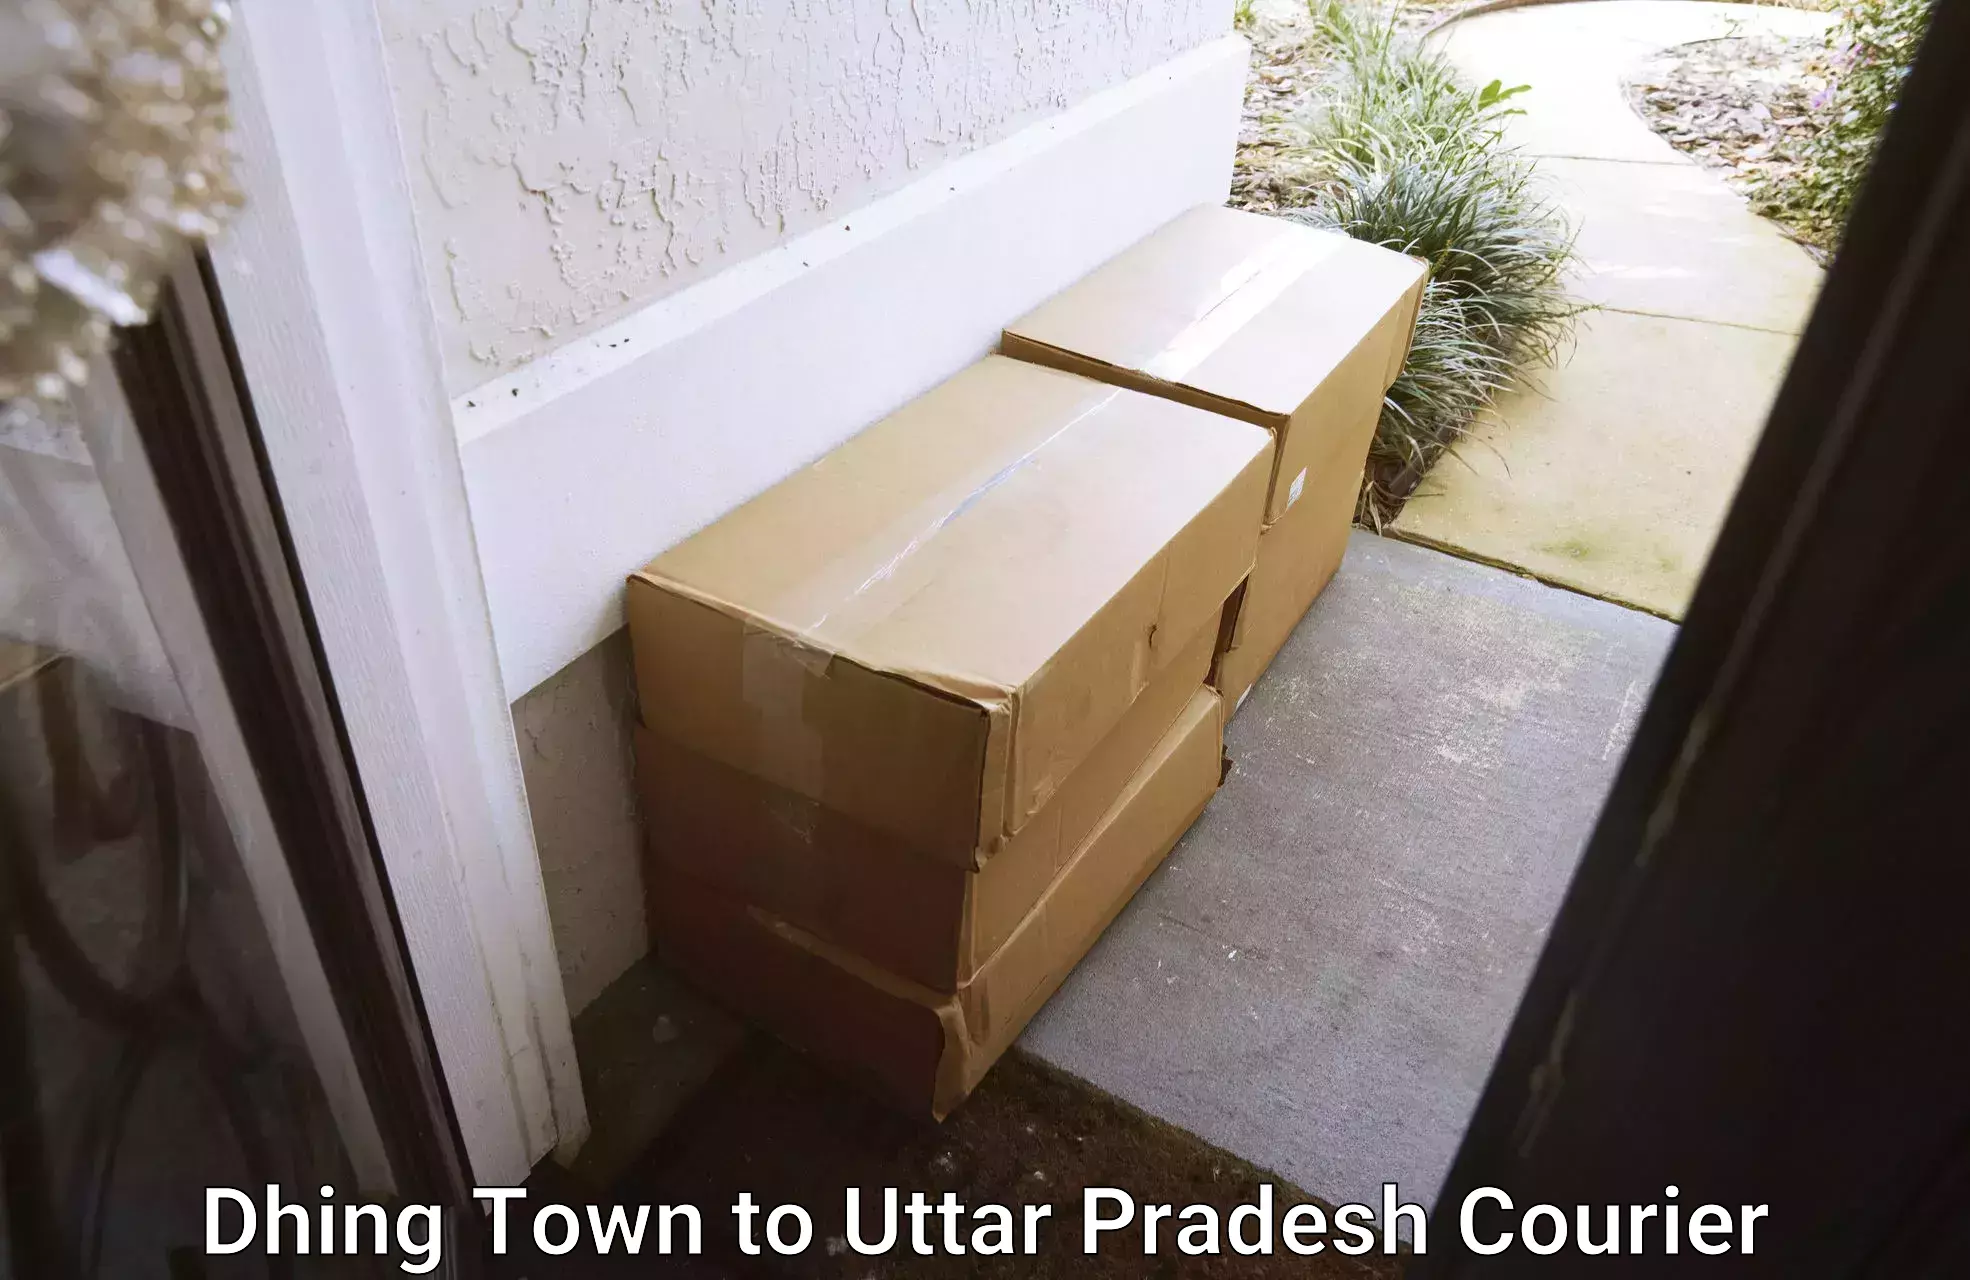 Regular parcel service Dhing Town to Ghaziabad